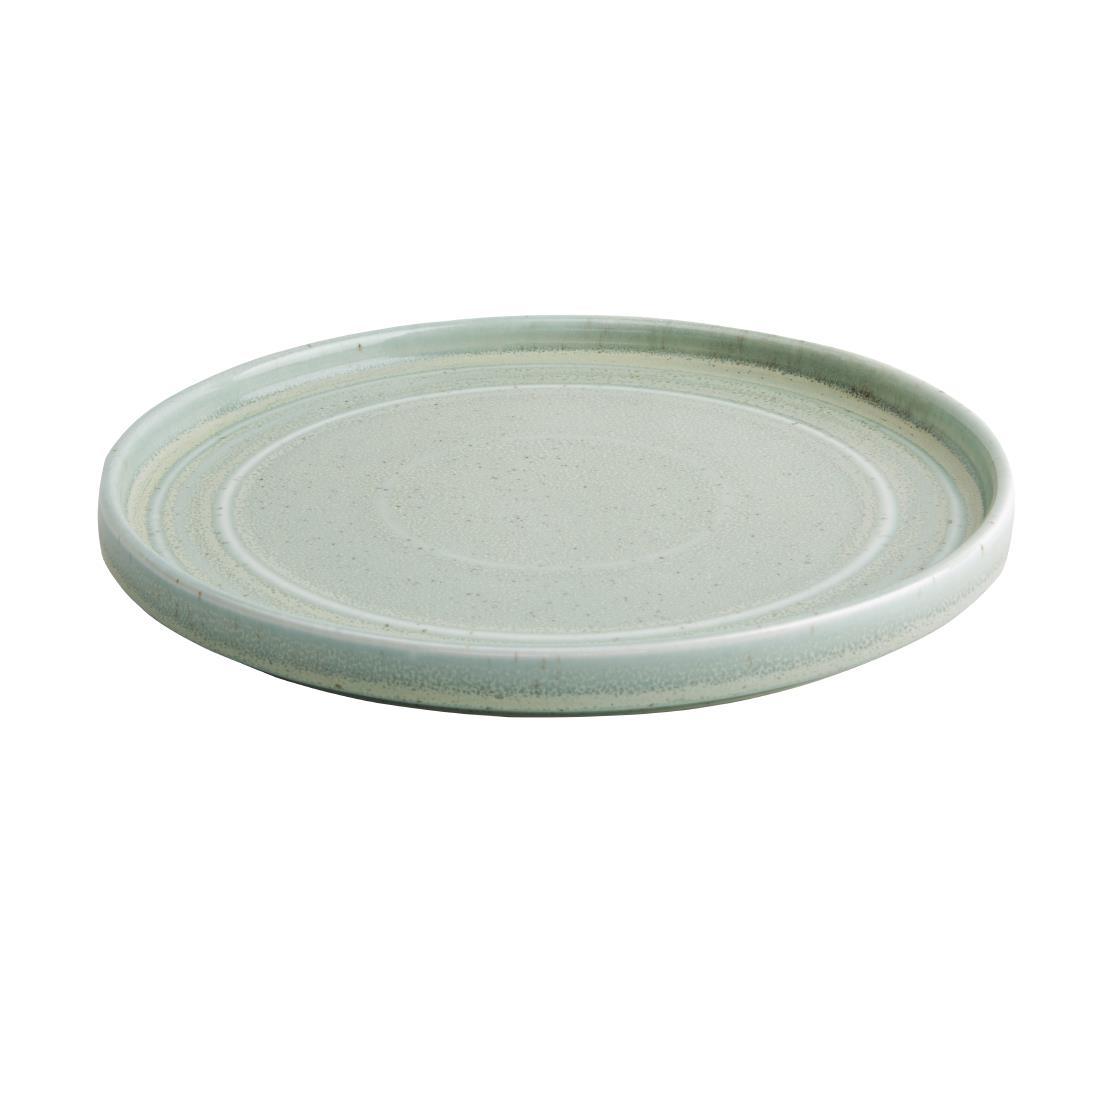 Olympia Cavolo Flat Round Plates Spring Green 220mm (Pack of 6) - FB563  - 2